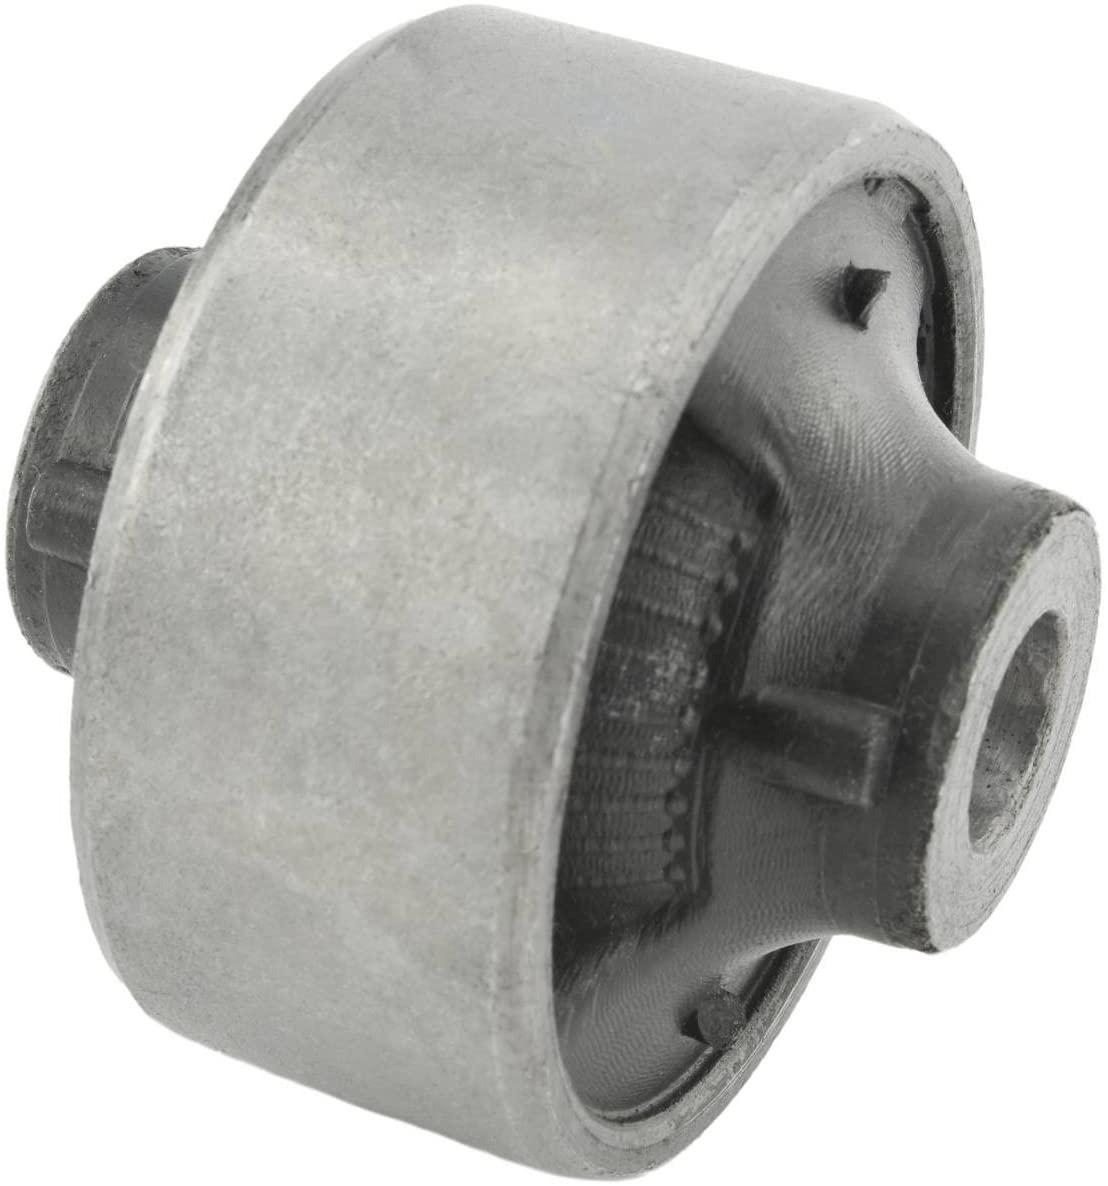 54500Jd000 - Rear Arm Bushing (for Front Arm) For Nissan - Febest